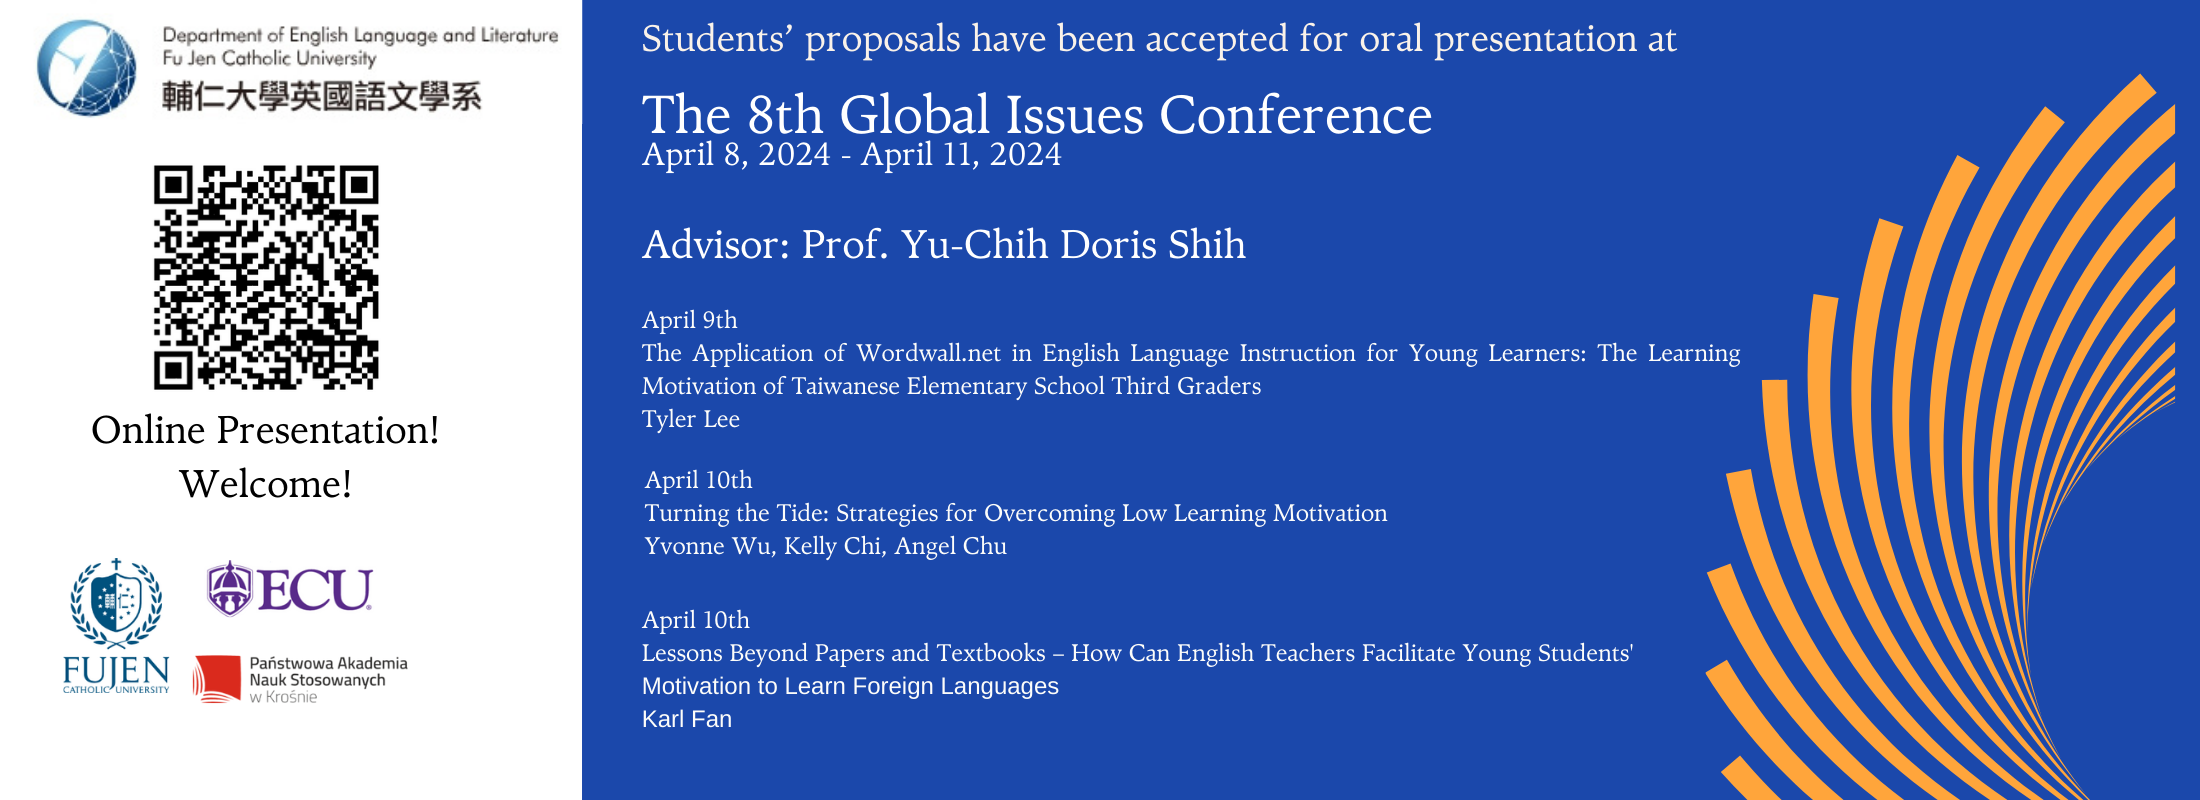 8th Global Issues Conference